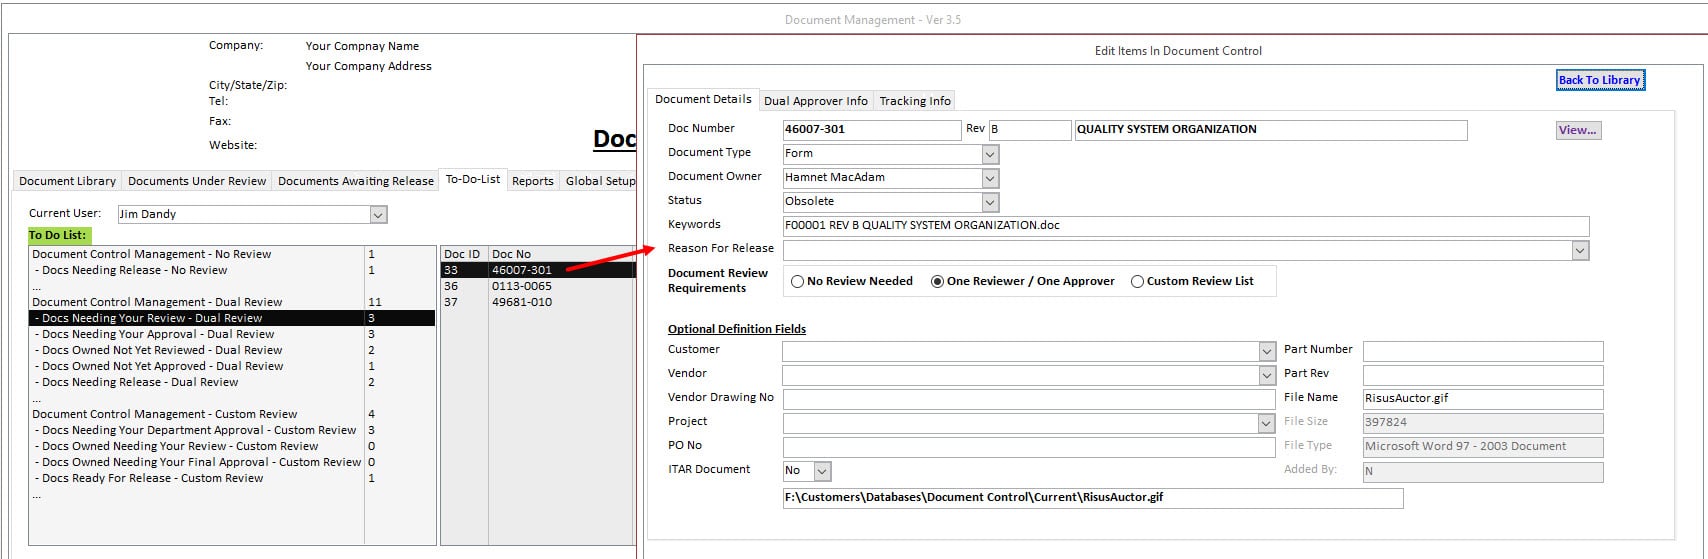 Document Details and Single Click View